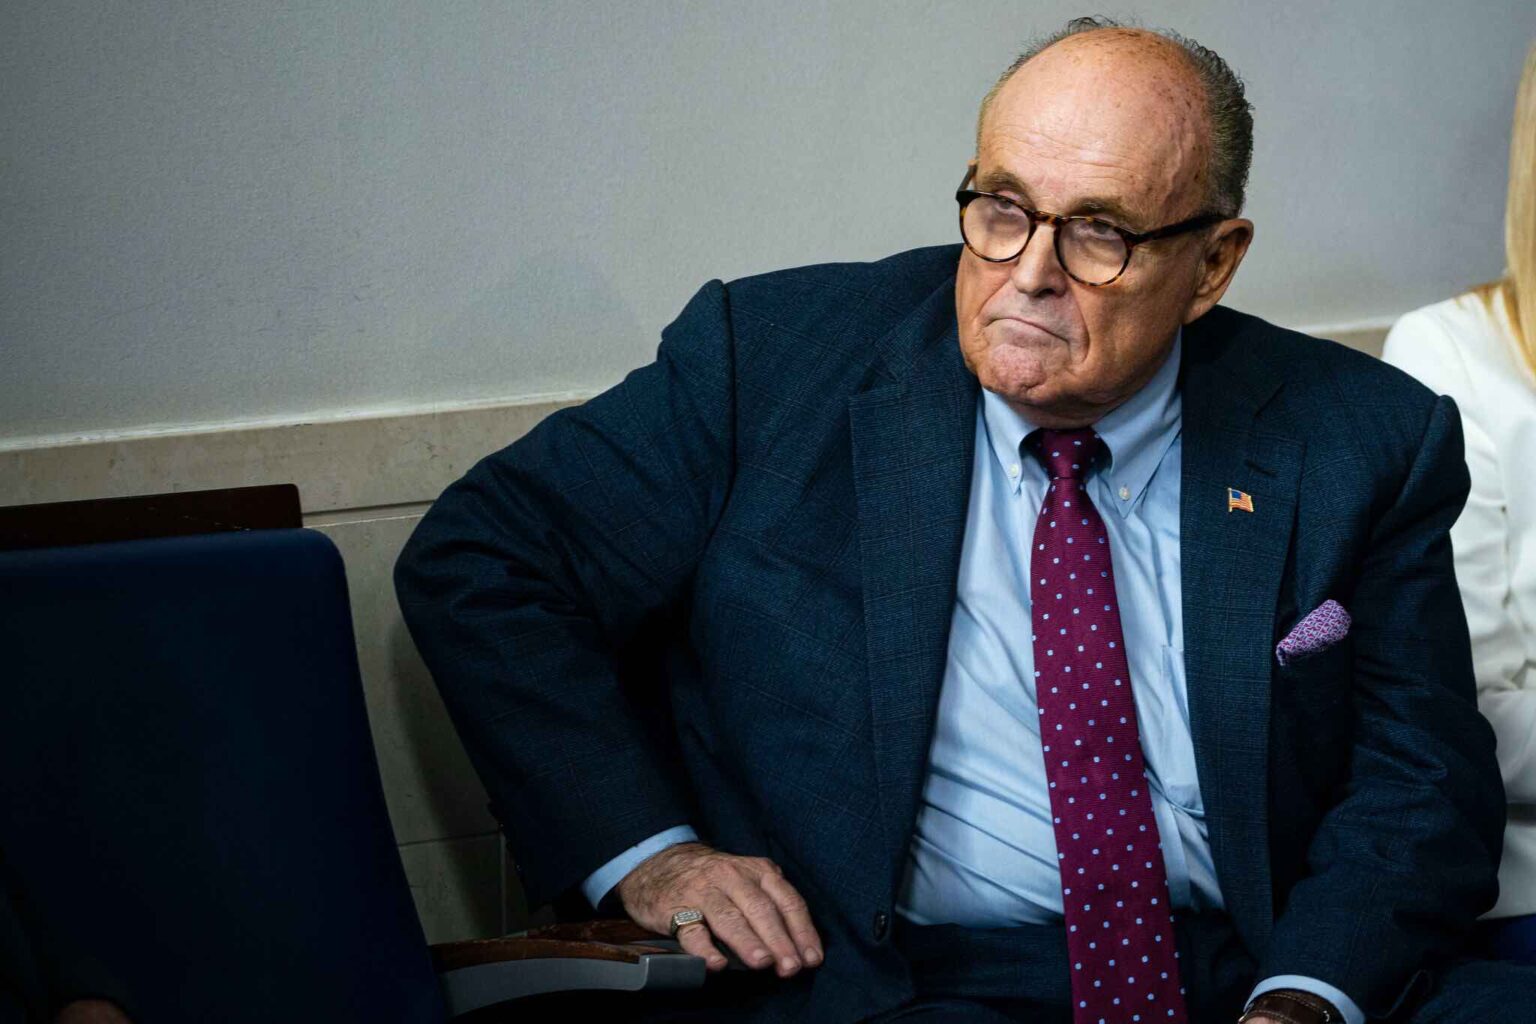 From being NYC's mayor to running for President to working for Trump: See how Rudy Giuliani gained his net worth.